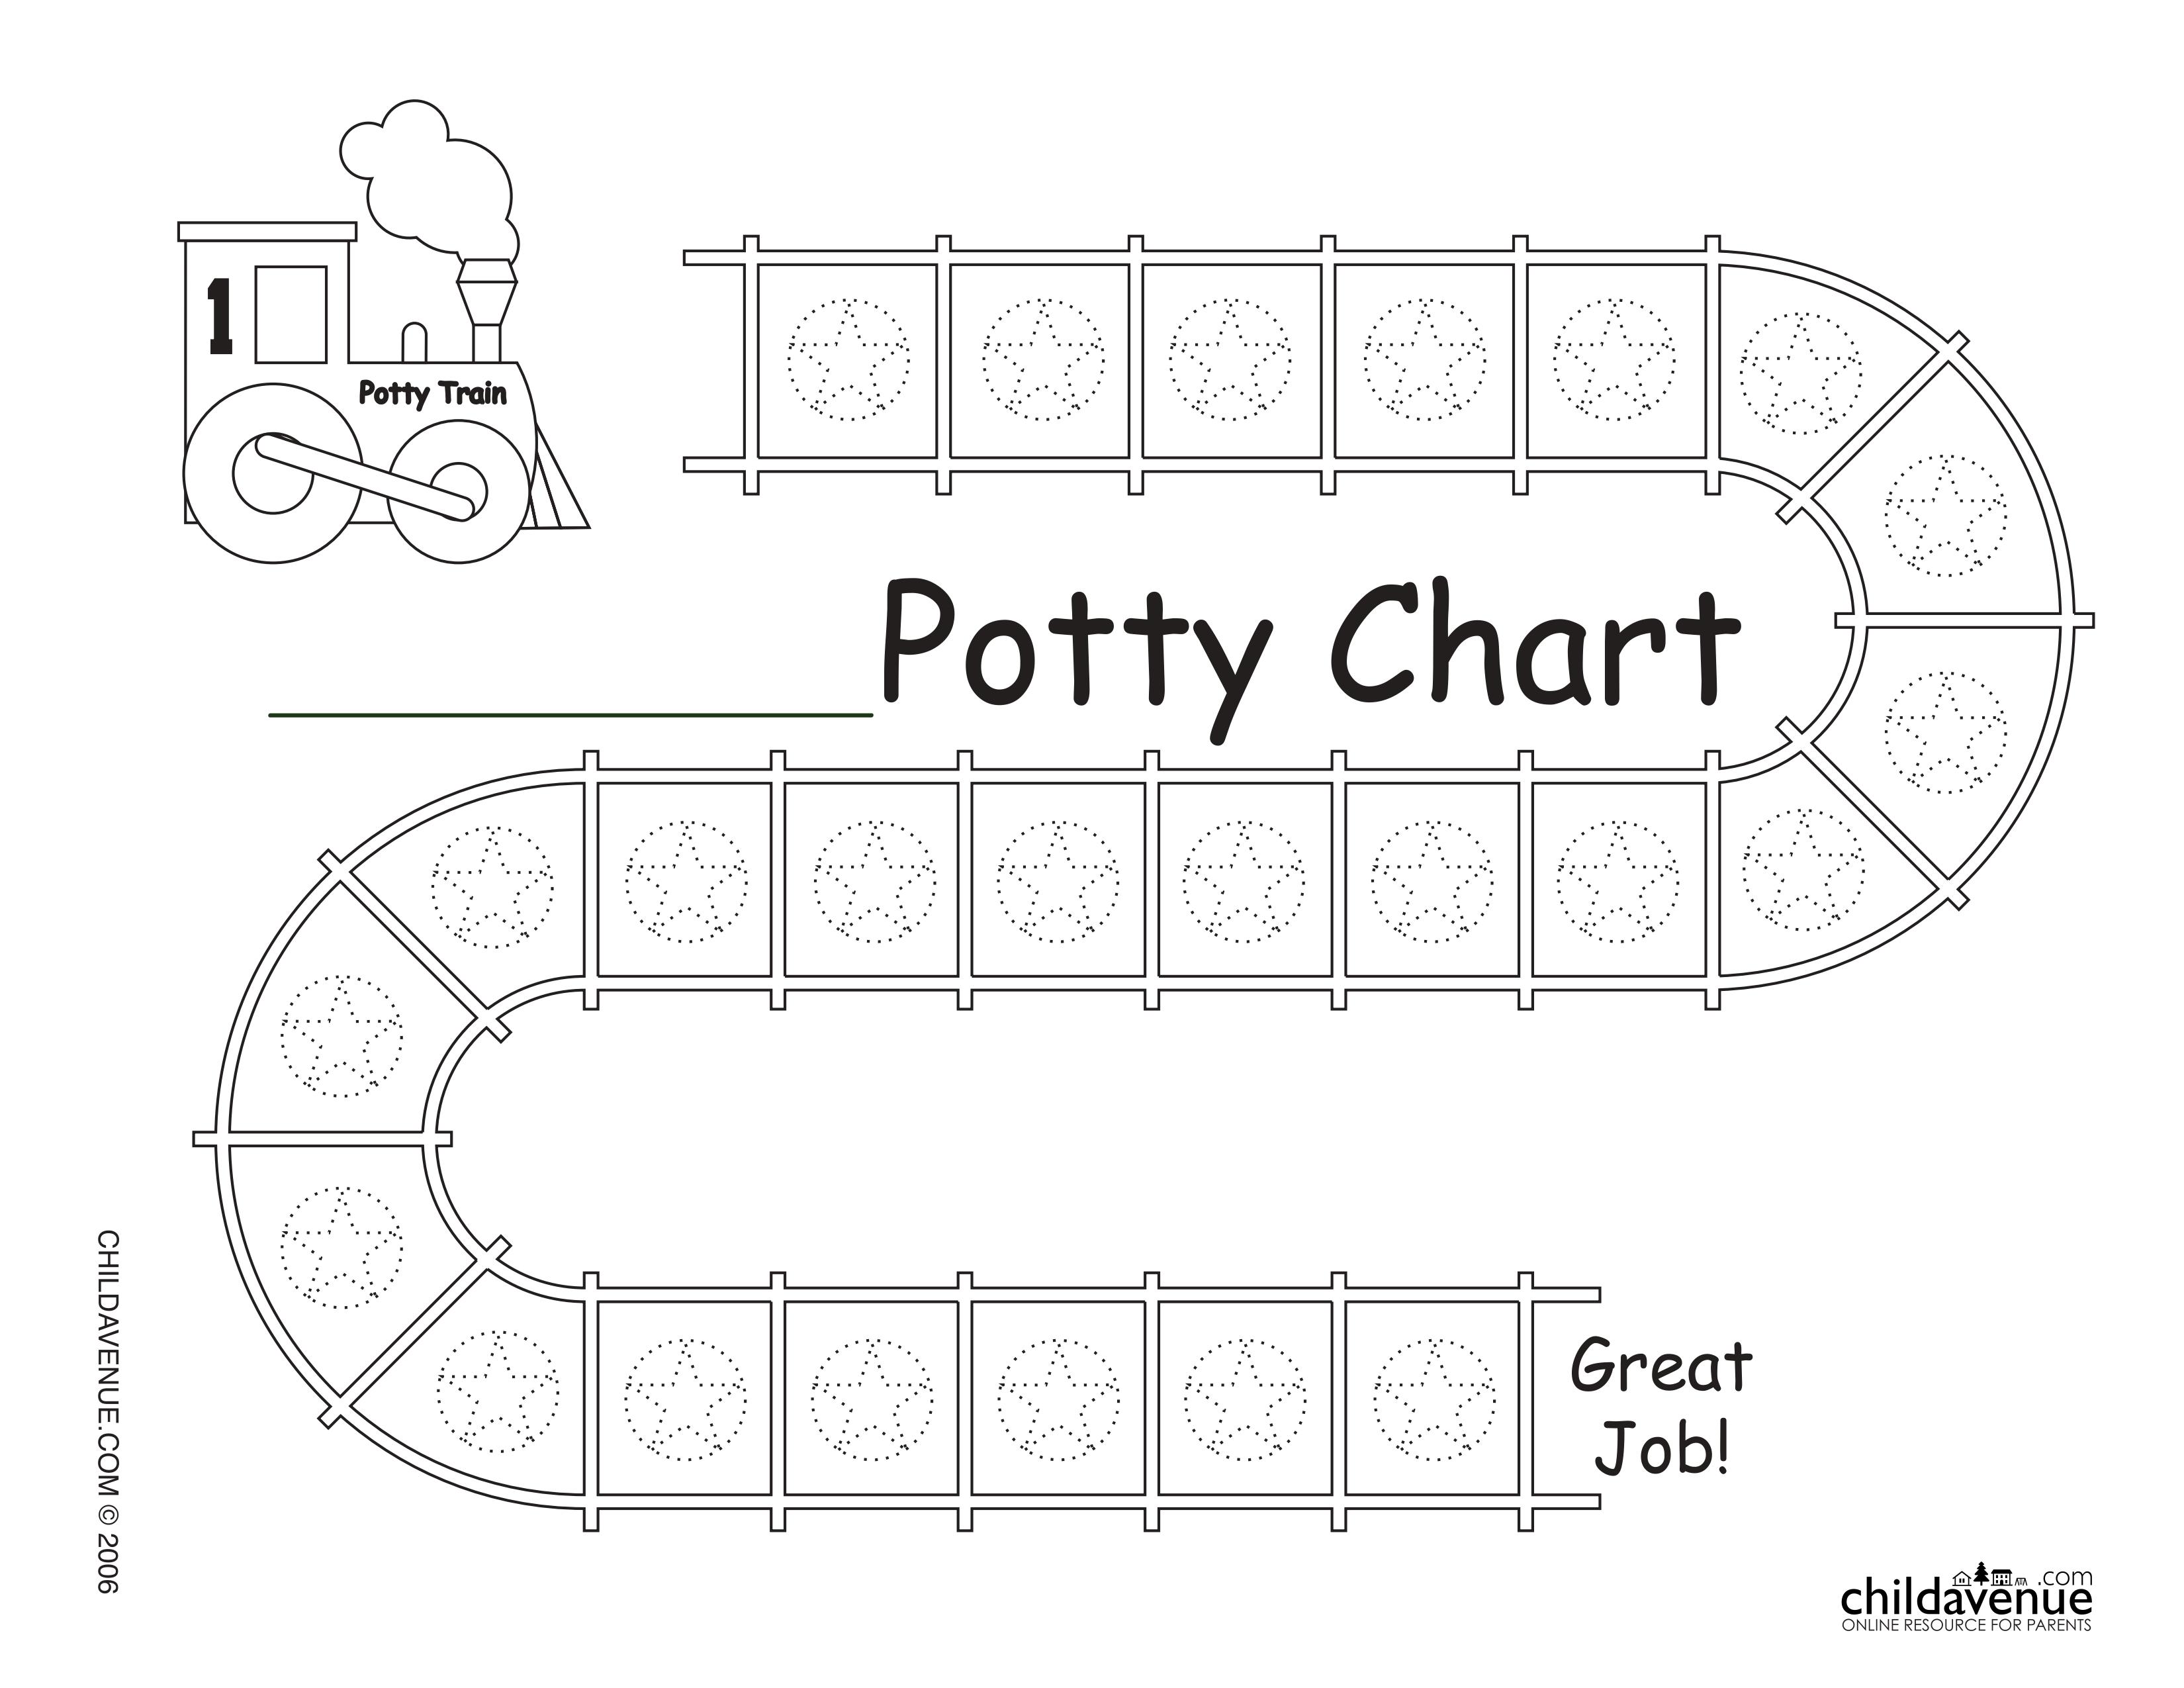 Potty Training Charts For Toddlers